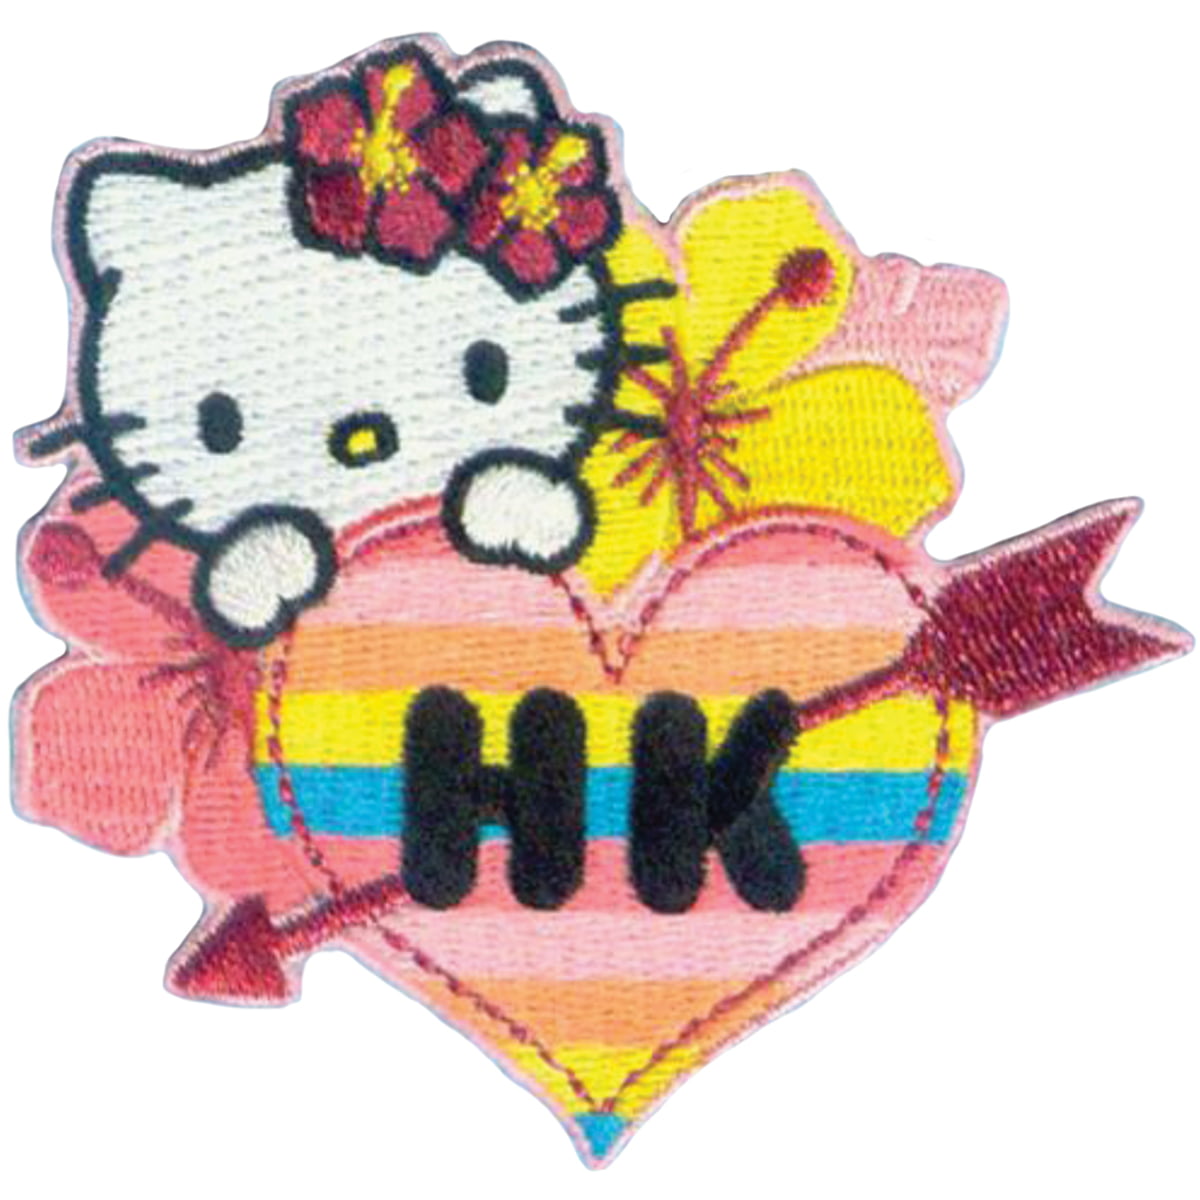 Ukelele - Hello Kitty Patch - C&D Visionary